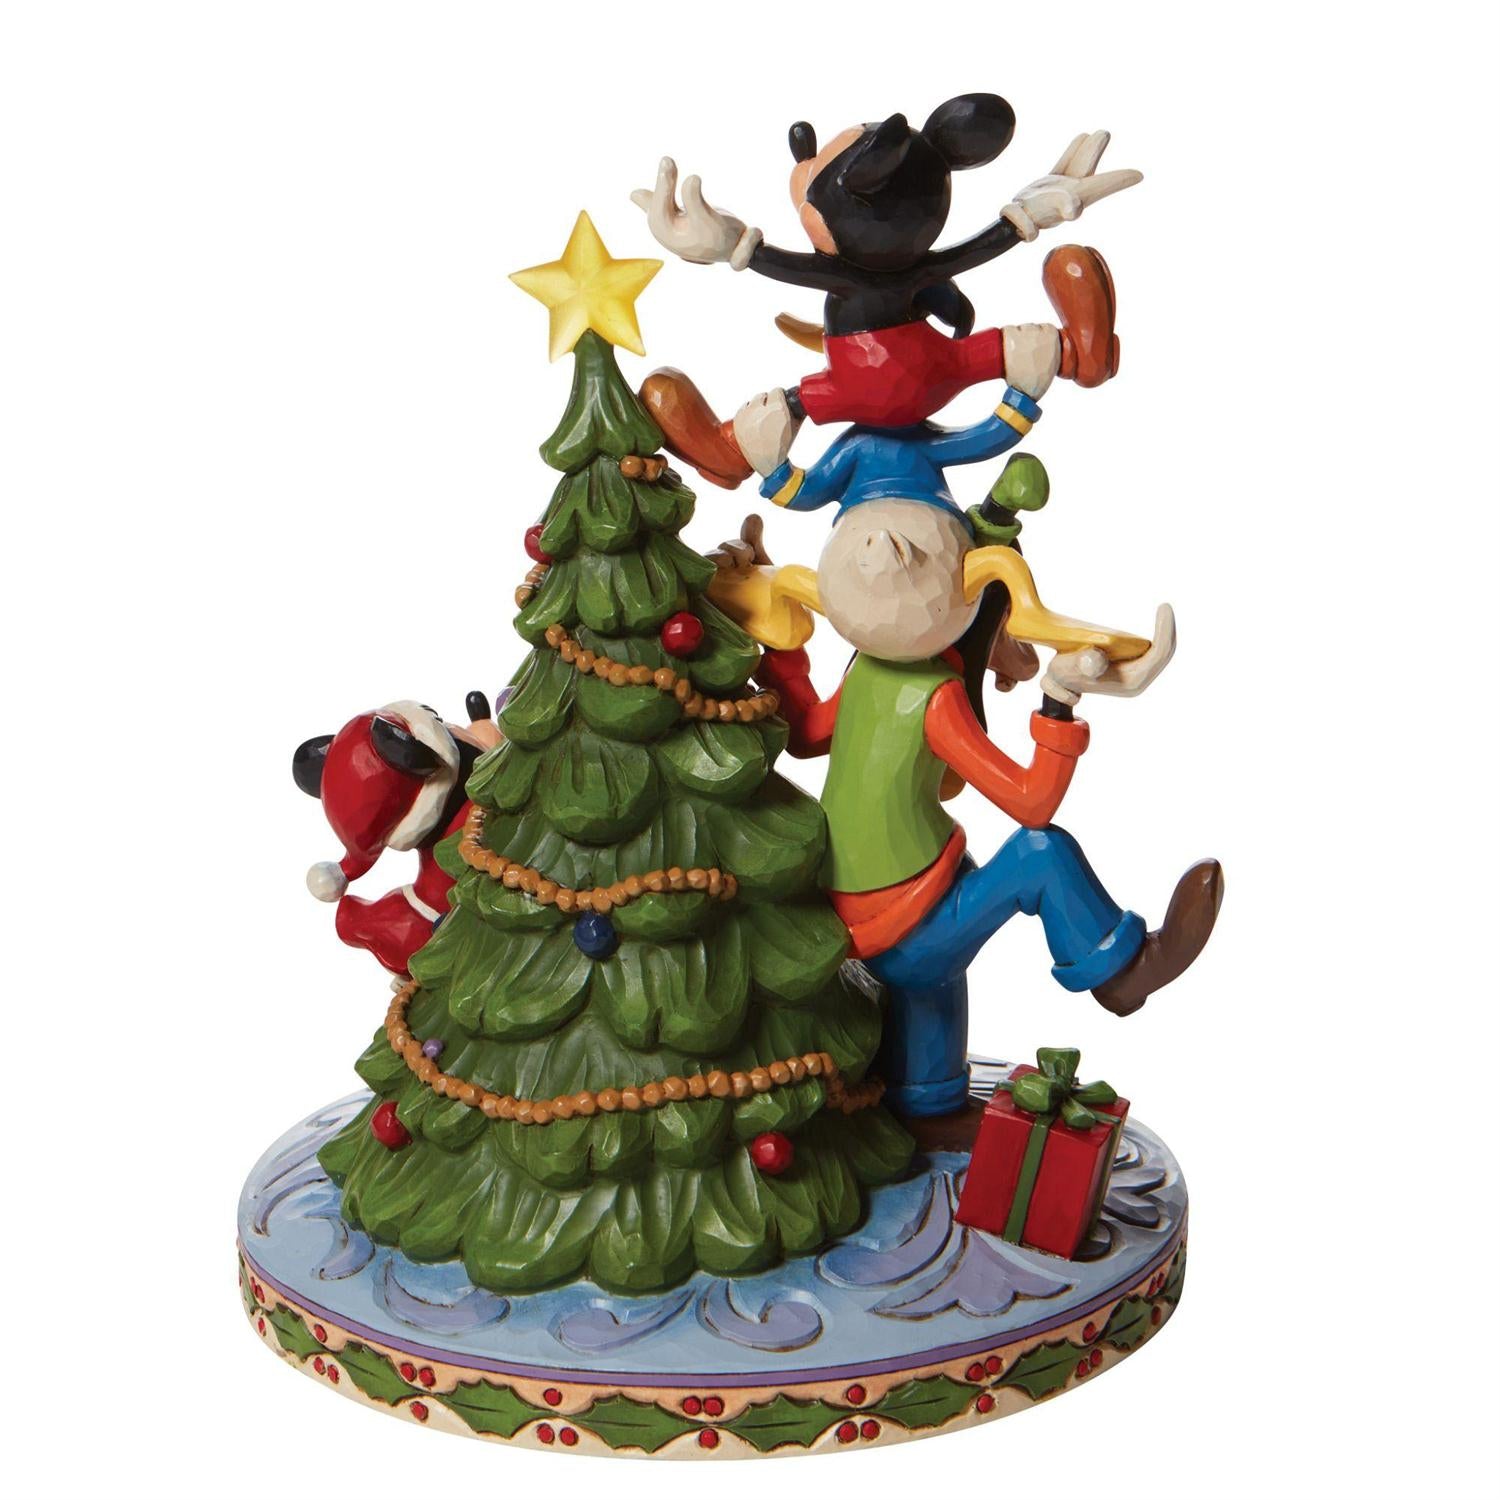 friends form a teetering tower to hoist him to the top of the Mouse family tree - Backview